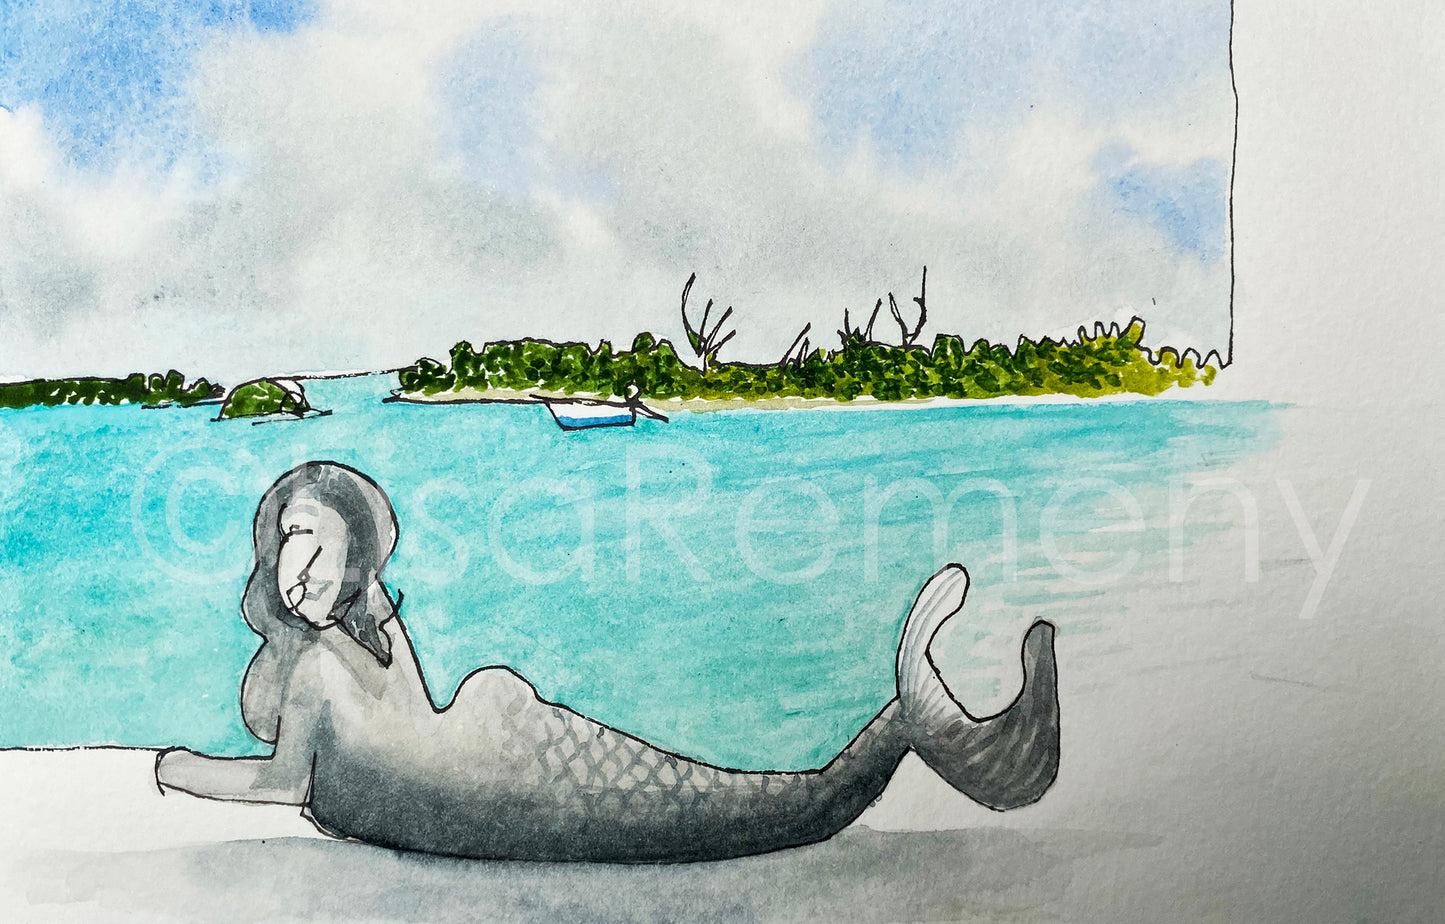 Watercolor and Ink on Paper - Mermaid Relaxing by the Creek